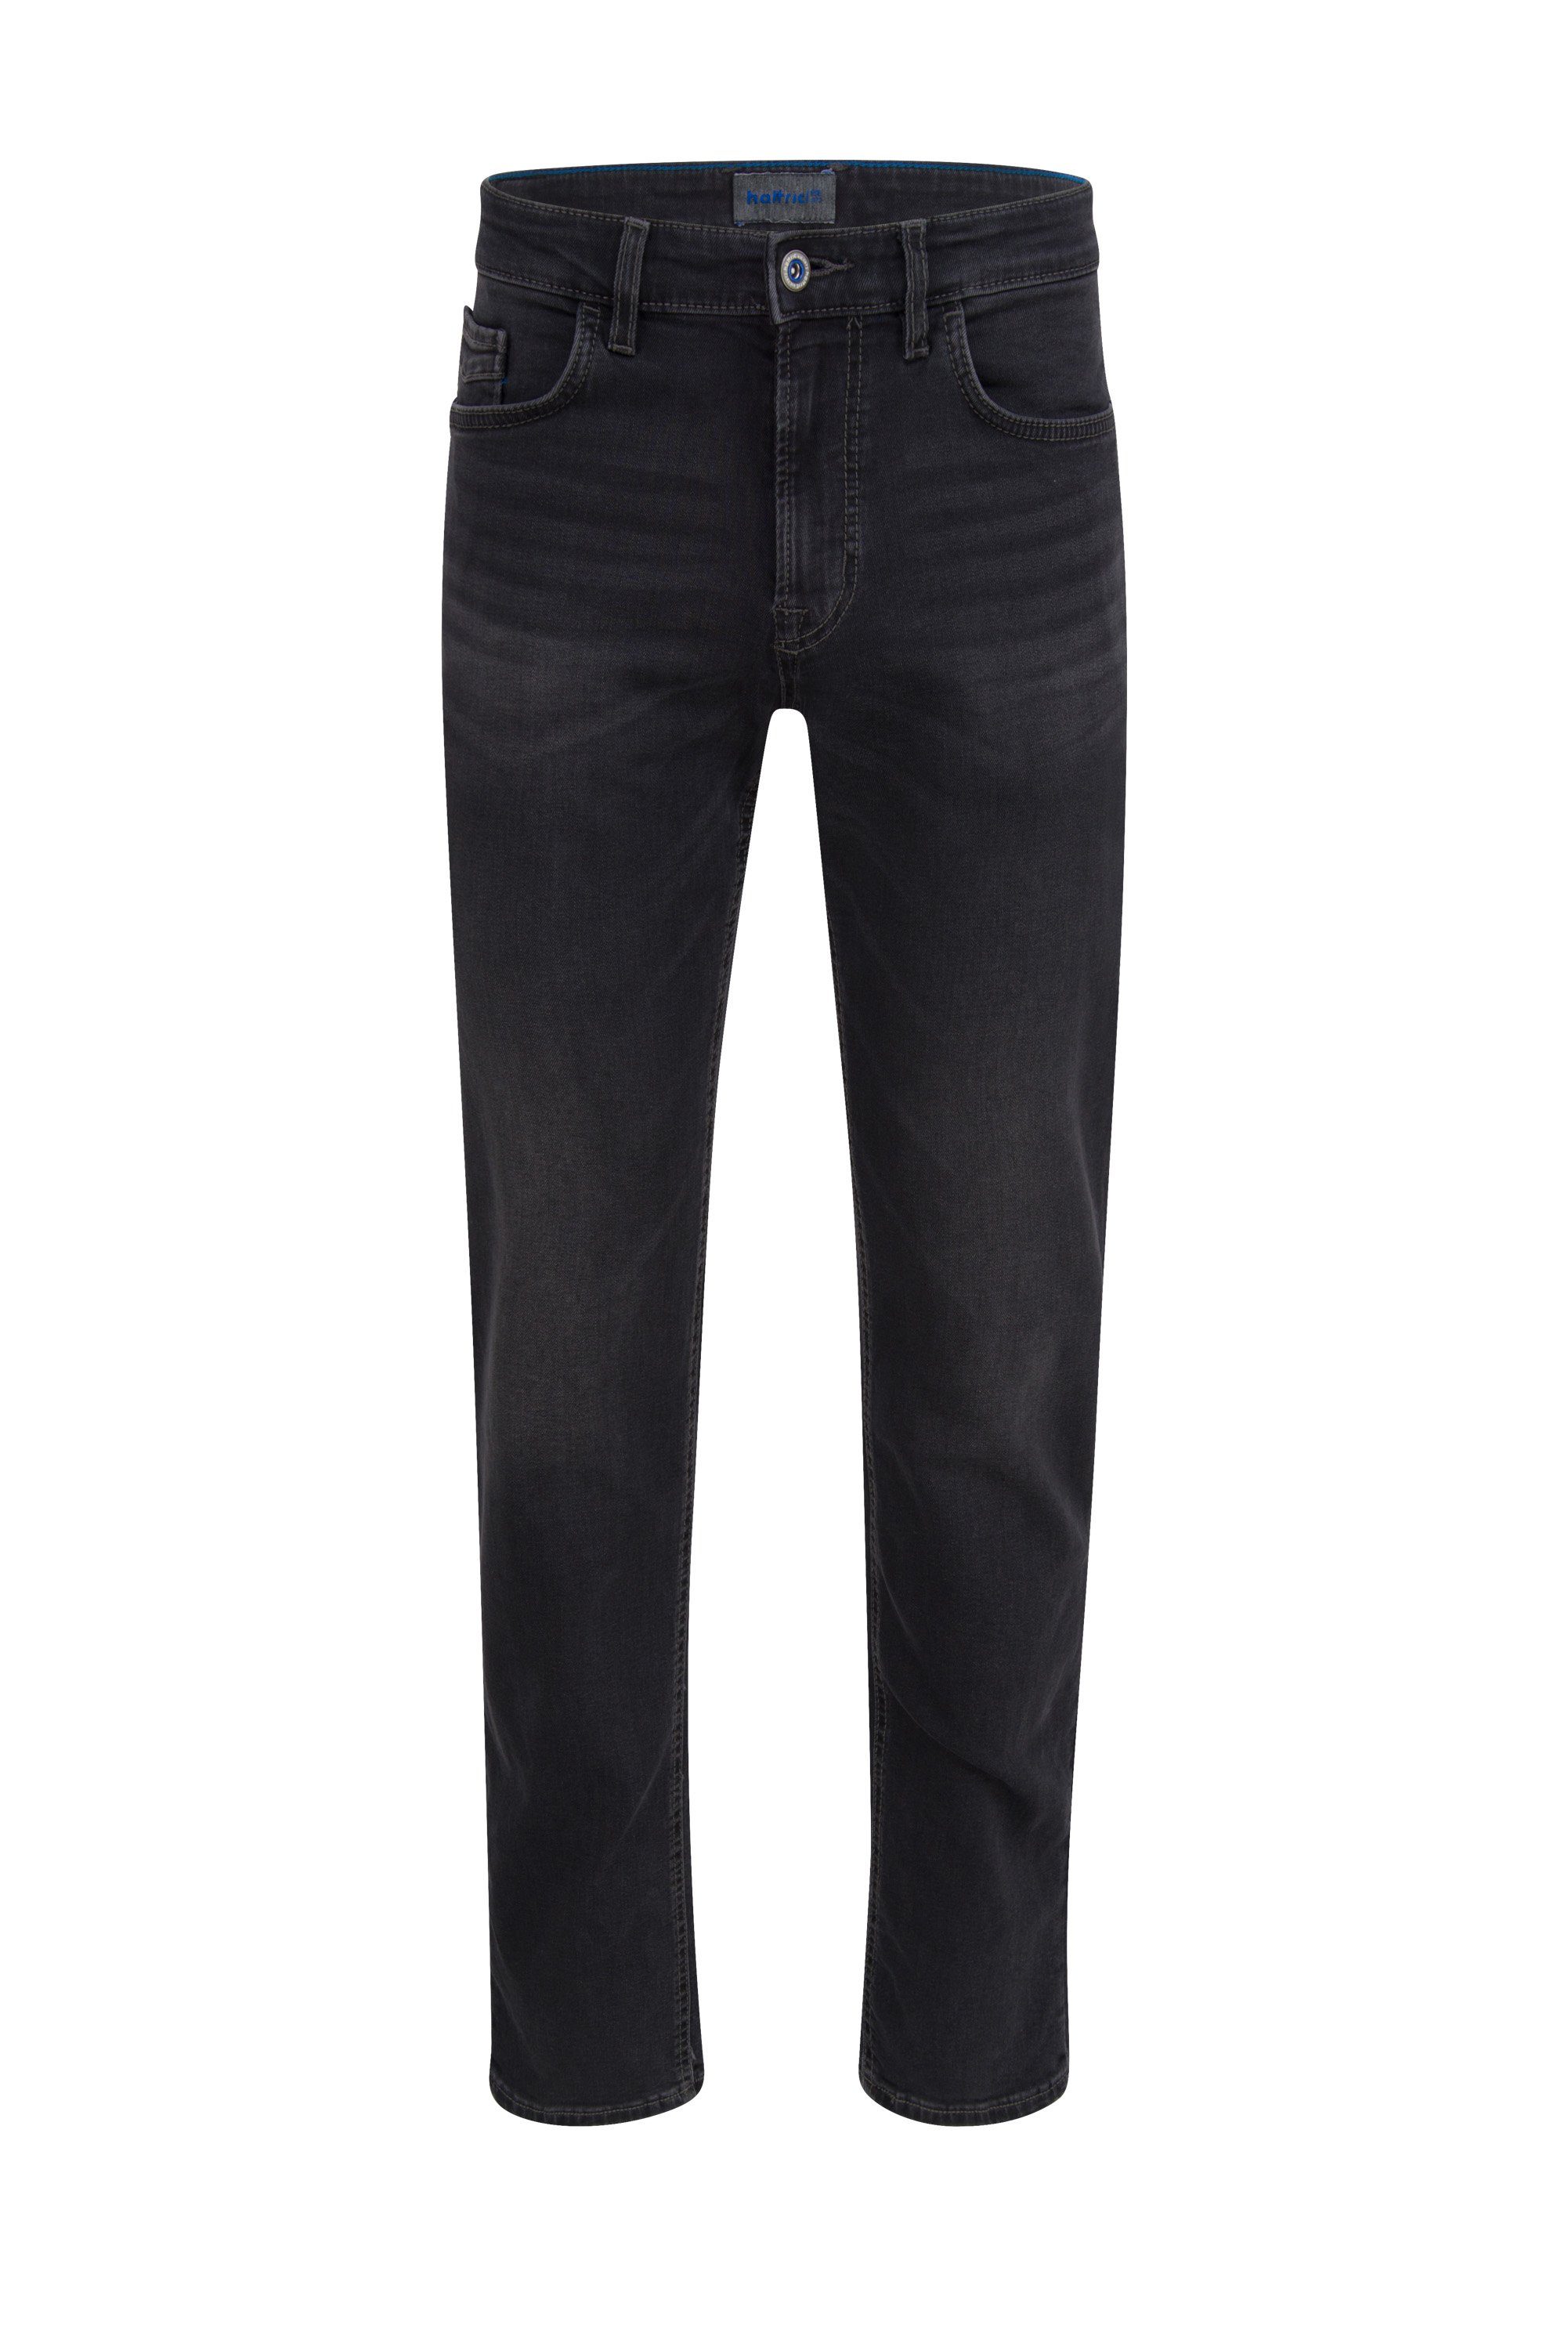 Hattric 5-Pocket-Jeans HATTRIC HUNTER dark washed out anthracite 688465 6350.08 - HIGH-STRETC